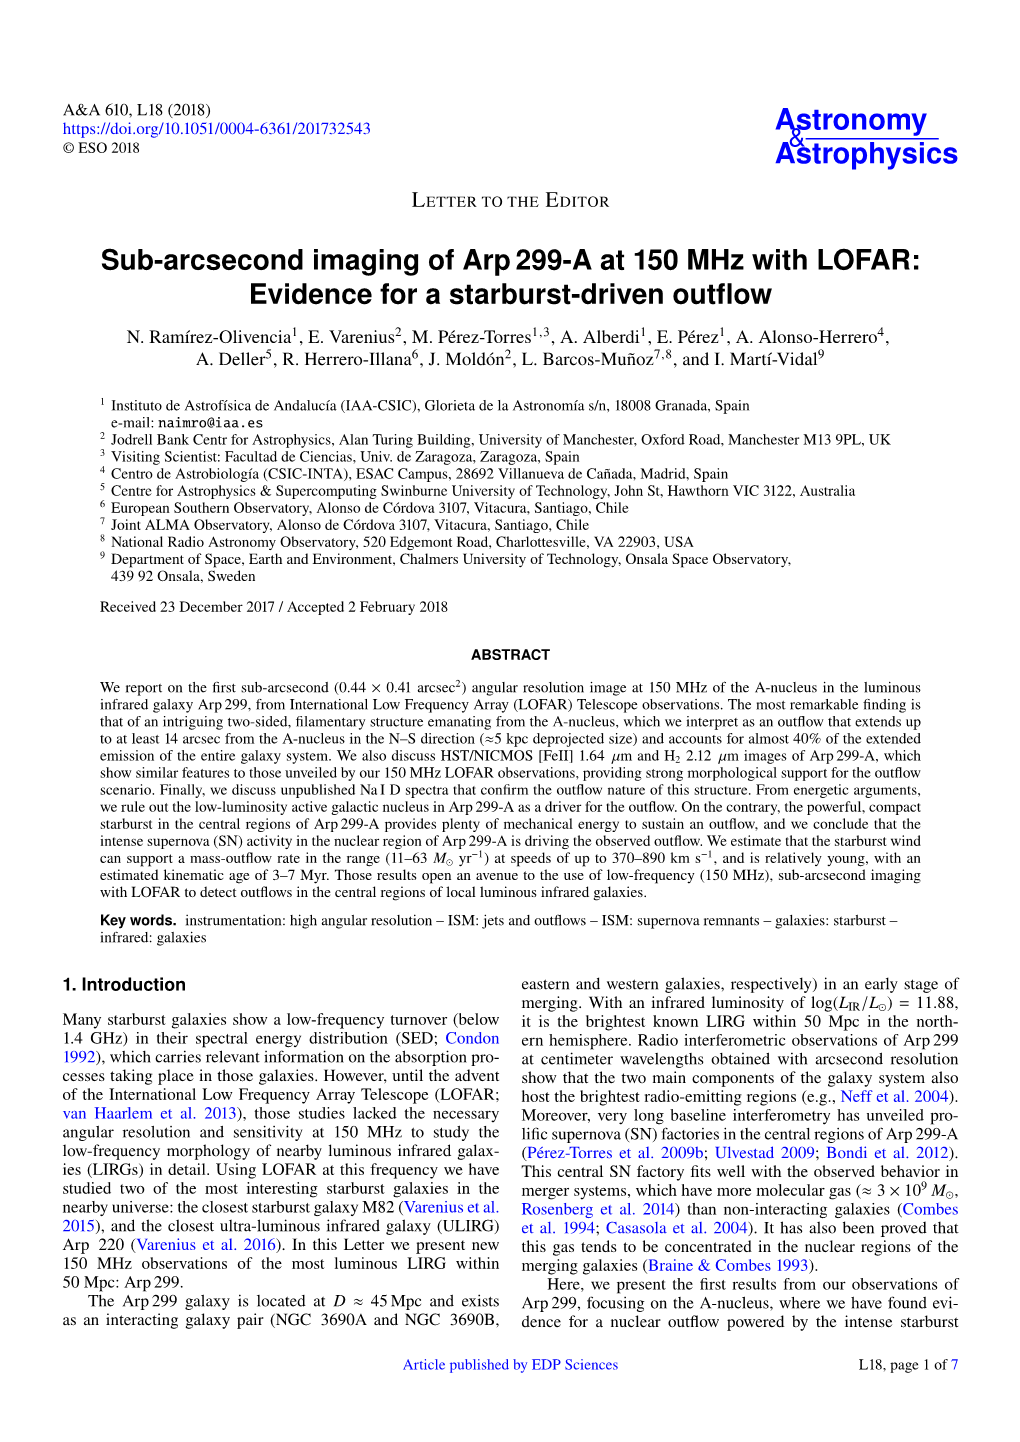 Sub-Arcsecond Imaging of Arp 299-A at 150 Mhz with LOFAR: Evidence for a Starburst-Driven Outﬂow N